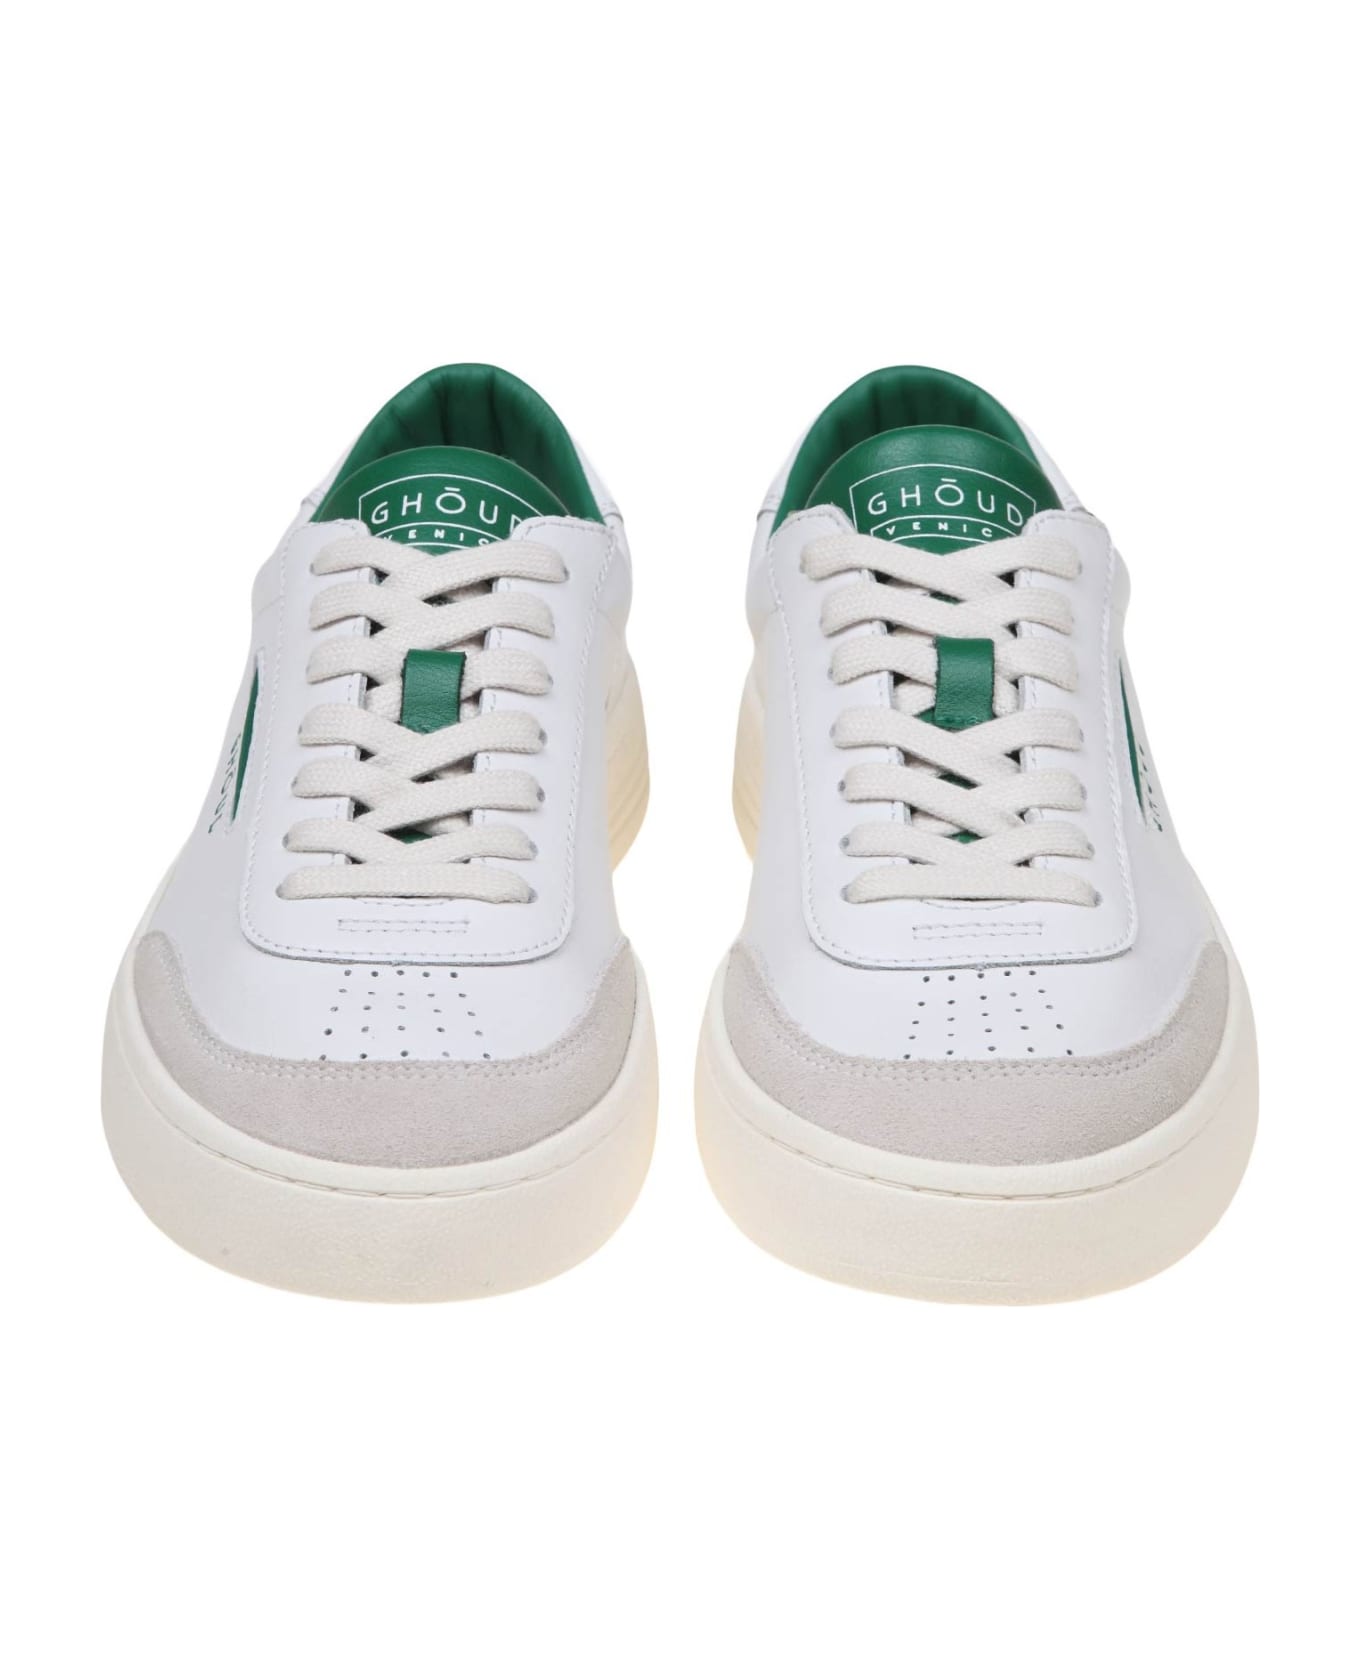 GHOUD Lido Low Sneakers In White/green Leather And Suede - Green スニーカー